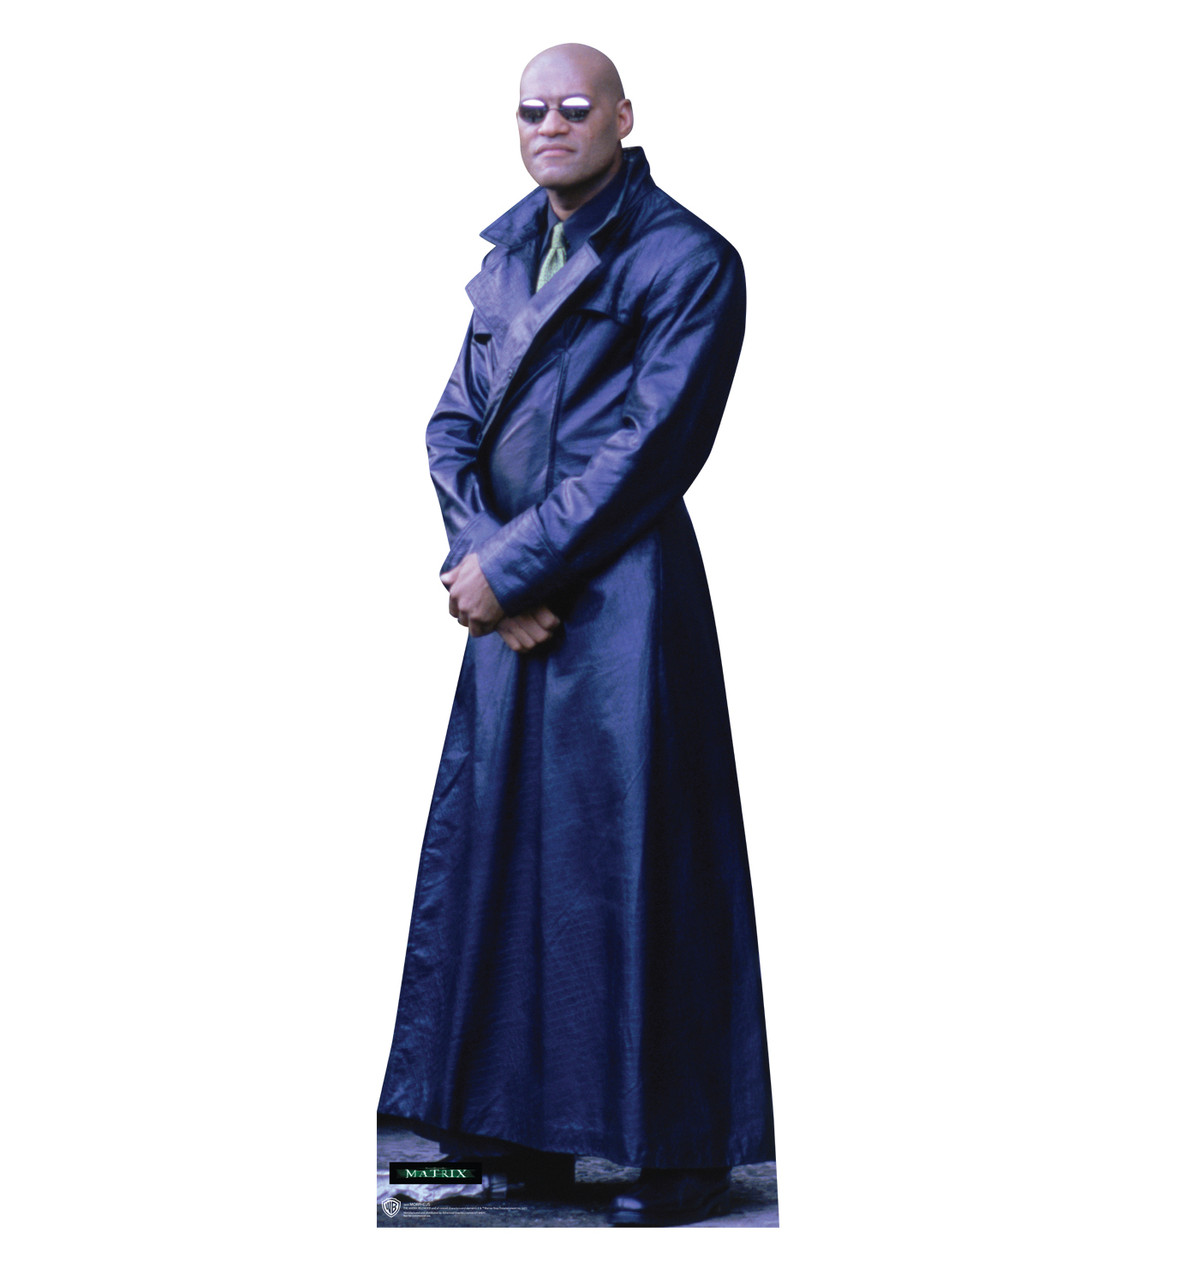 Life-size cardboard standee of Morpheus from the movie The Matrix.